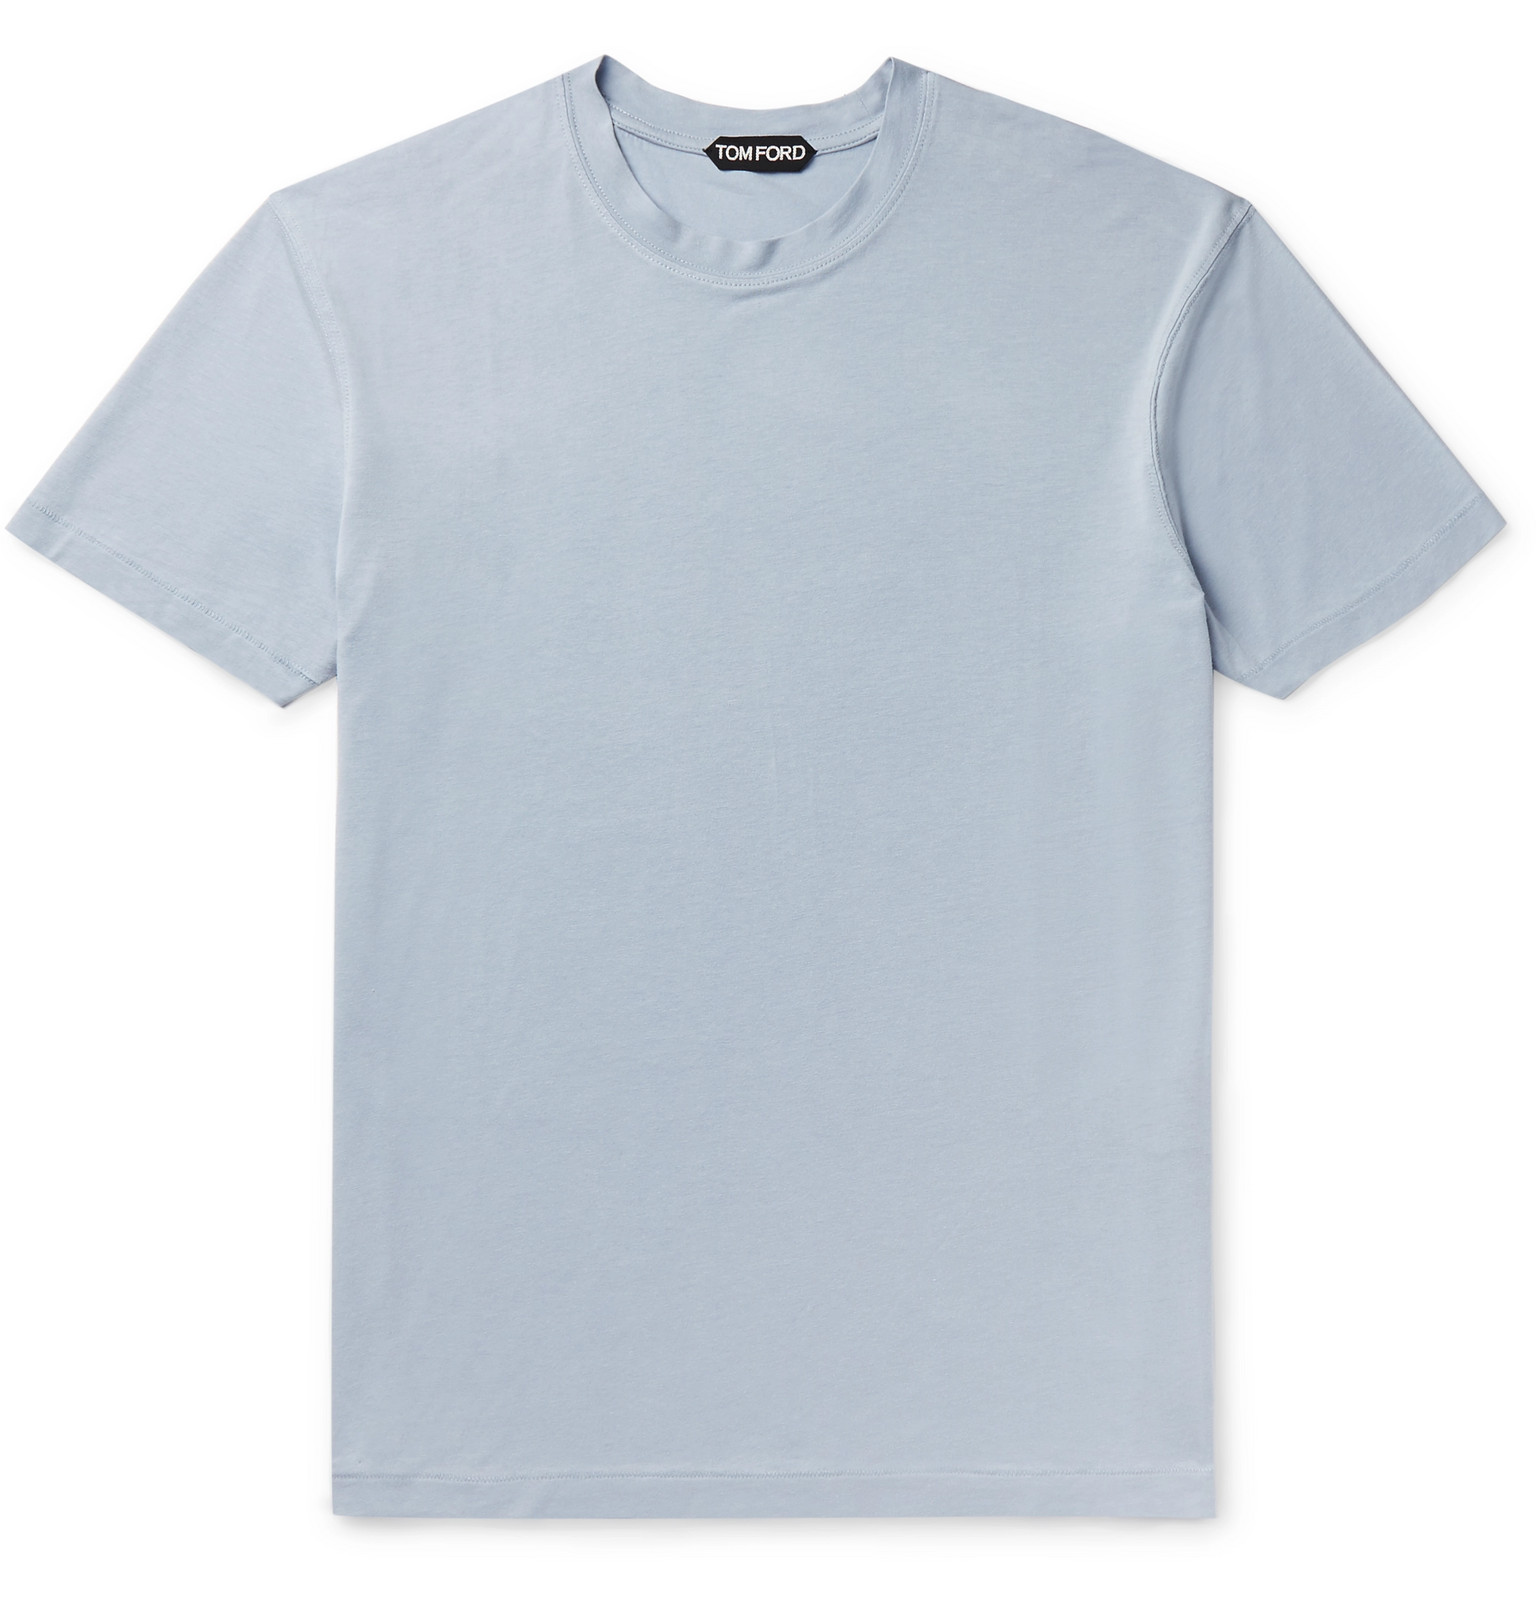 TOM FORD - Slim-Fit Lyocell and Cotton-Blend Jersey T-Shirt - Men ...